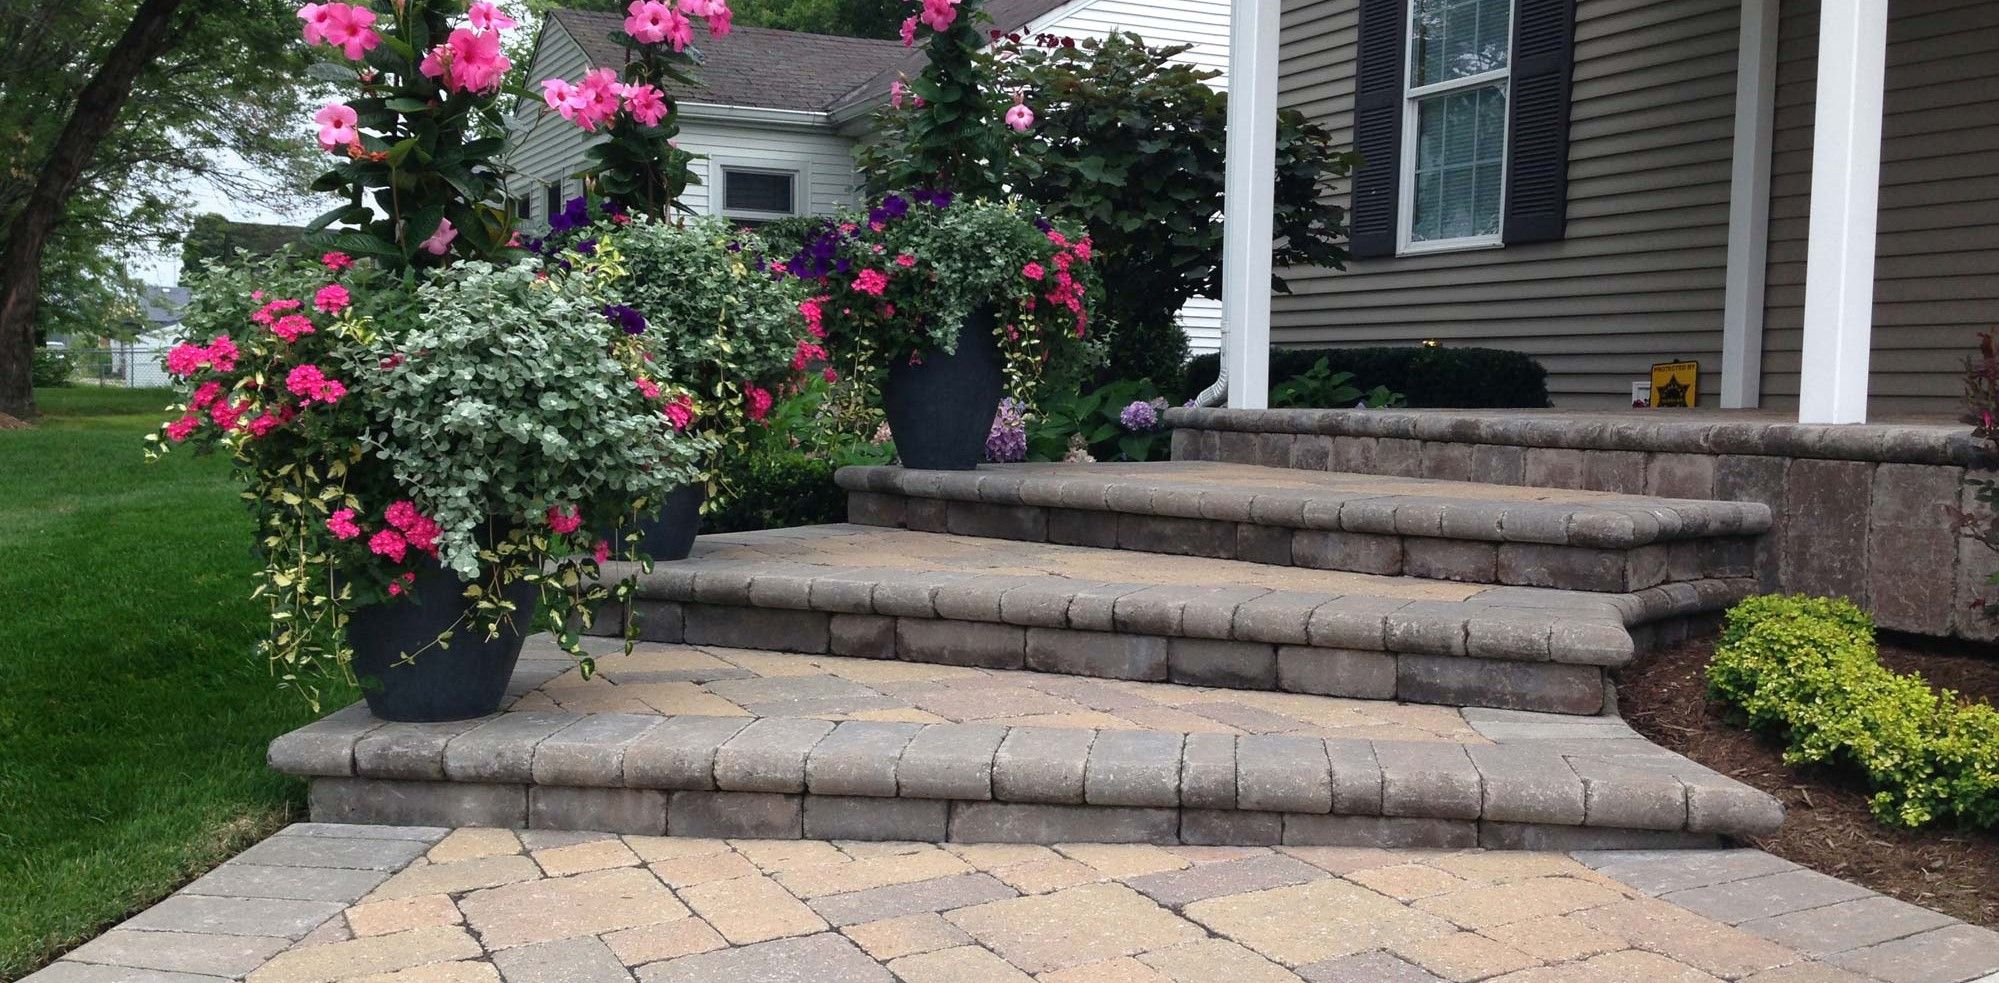 Paver steps with flowering planters.